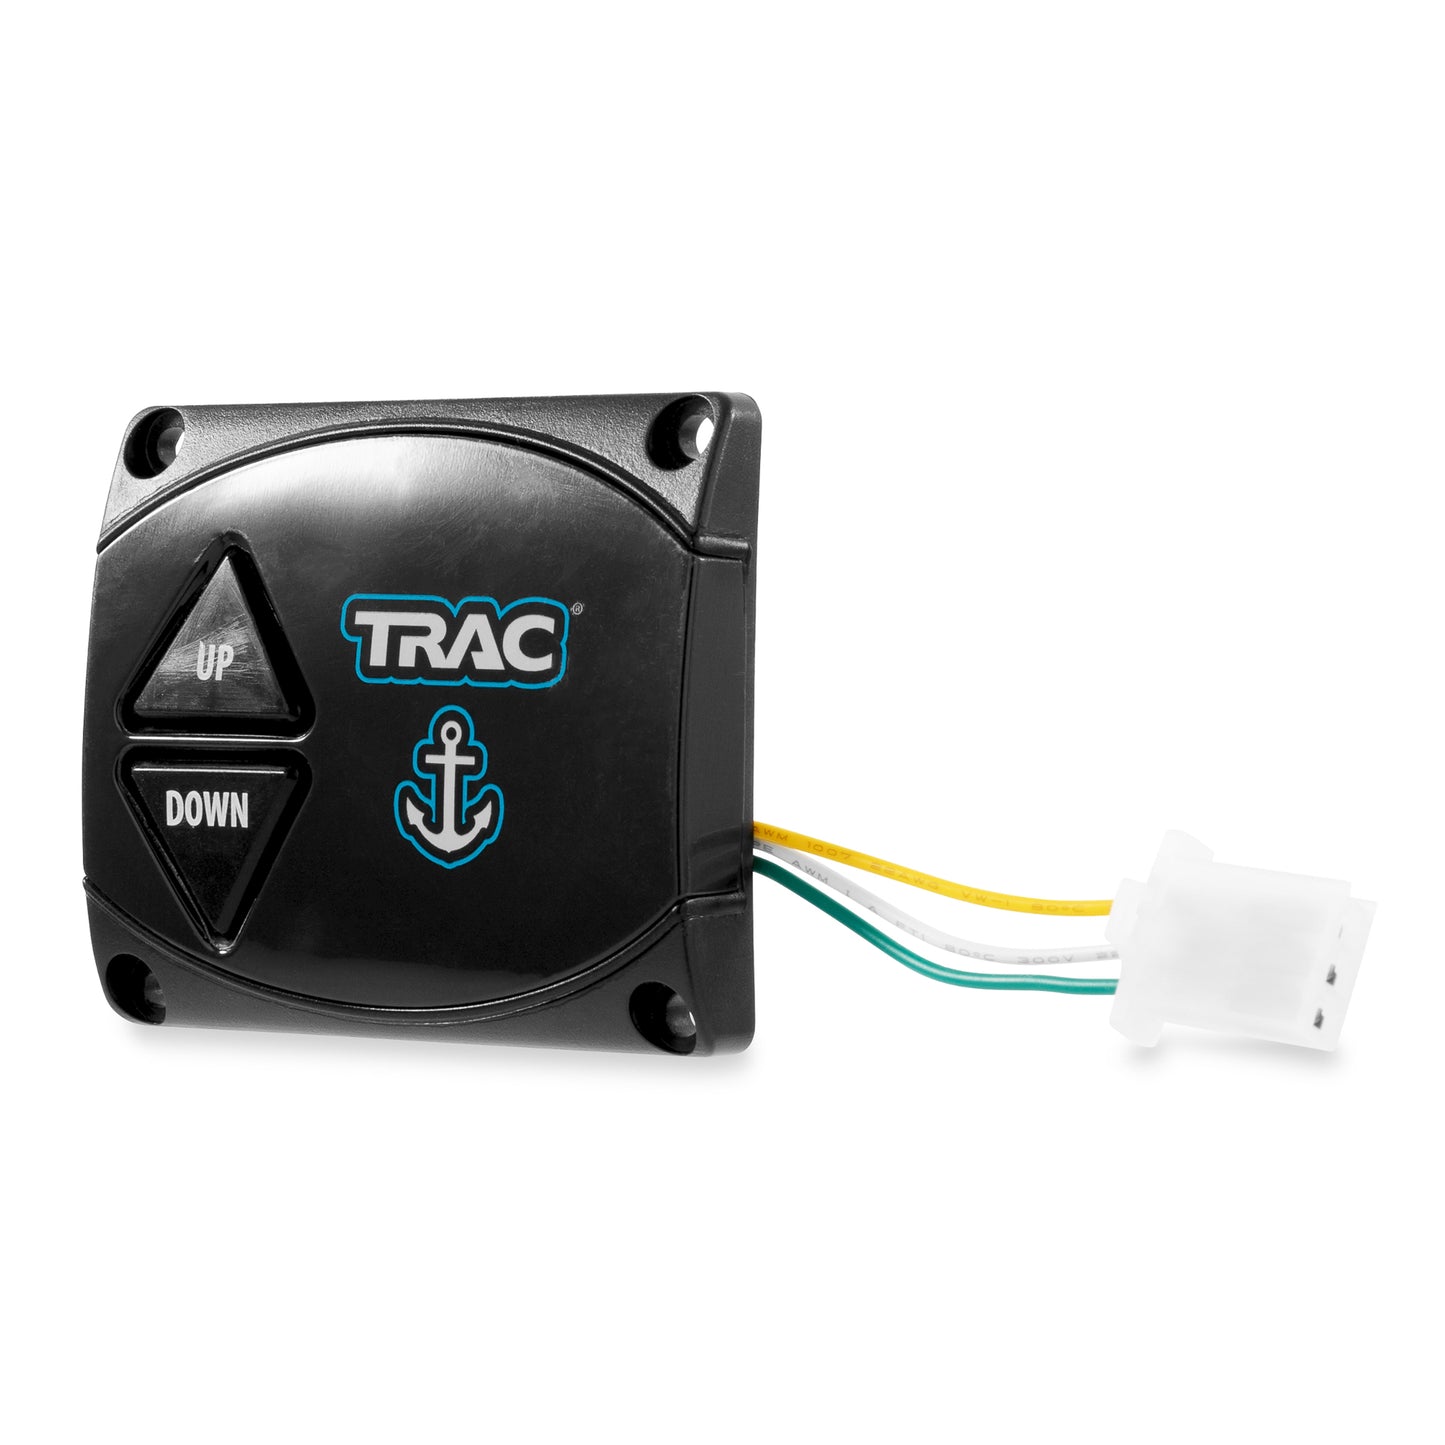 TRAC Outdoor G2 Switch Assembly